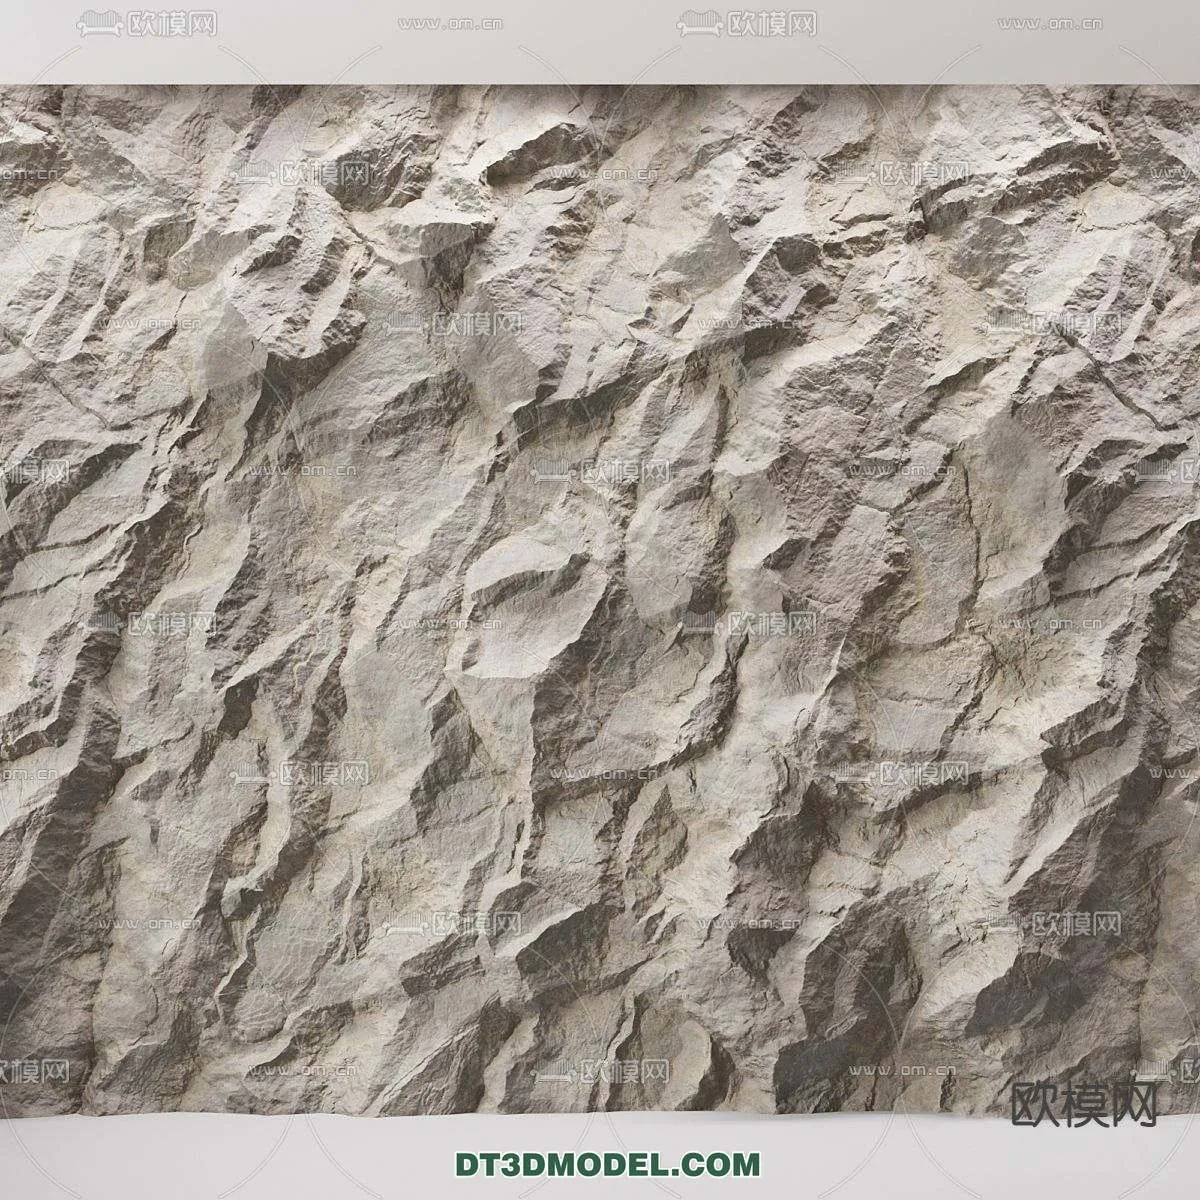 MATERIAL – TEXTURES – ROCK WALL – 0021